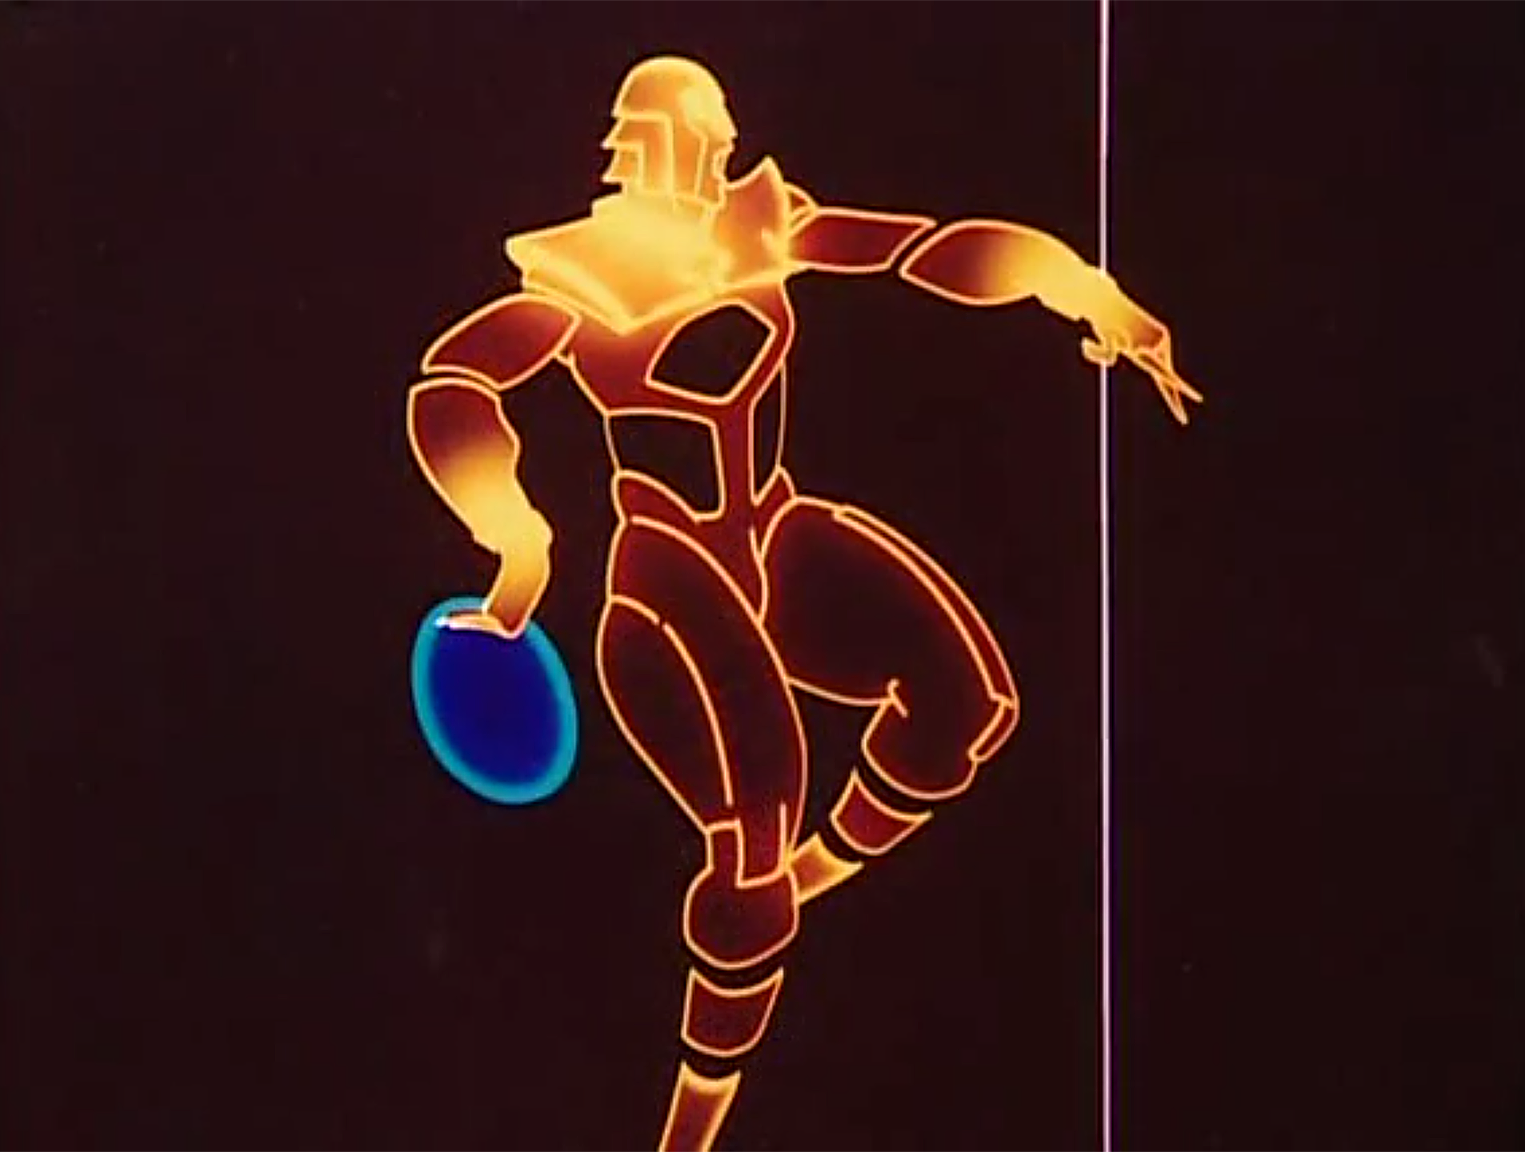 An early illustration of Tron, a character from the video game themed movie by Disney 1982